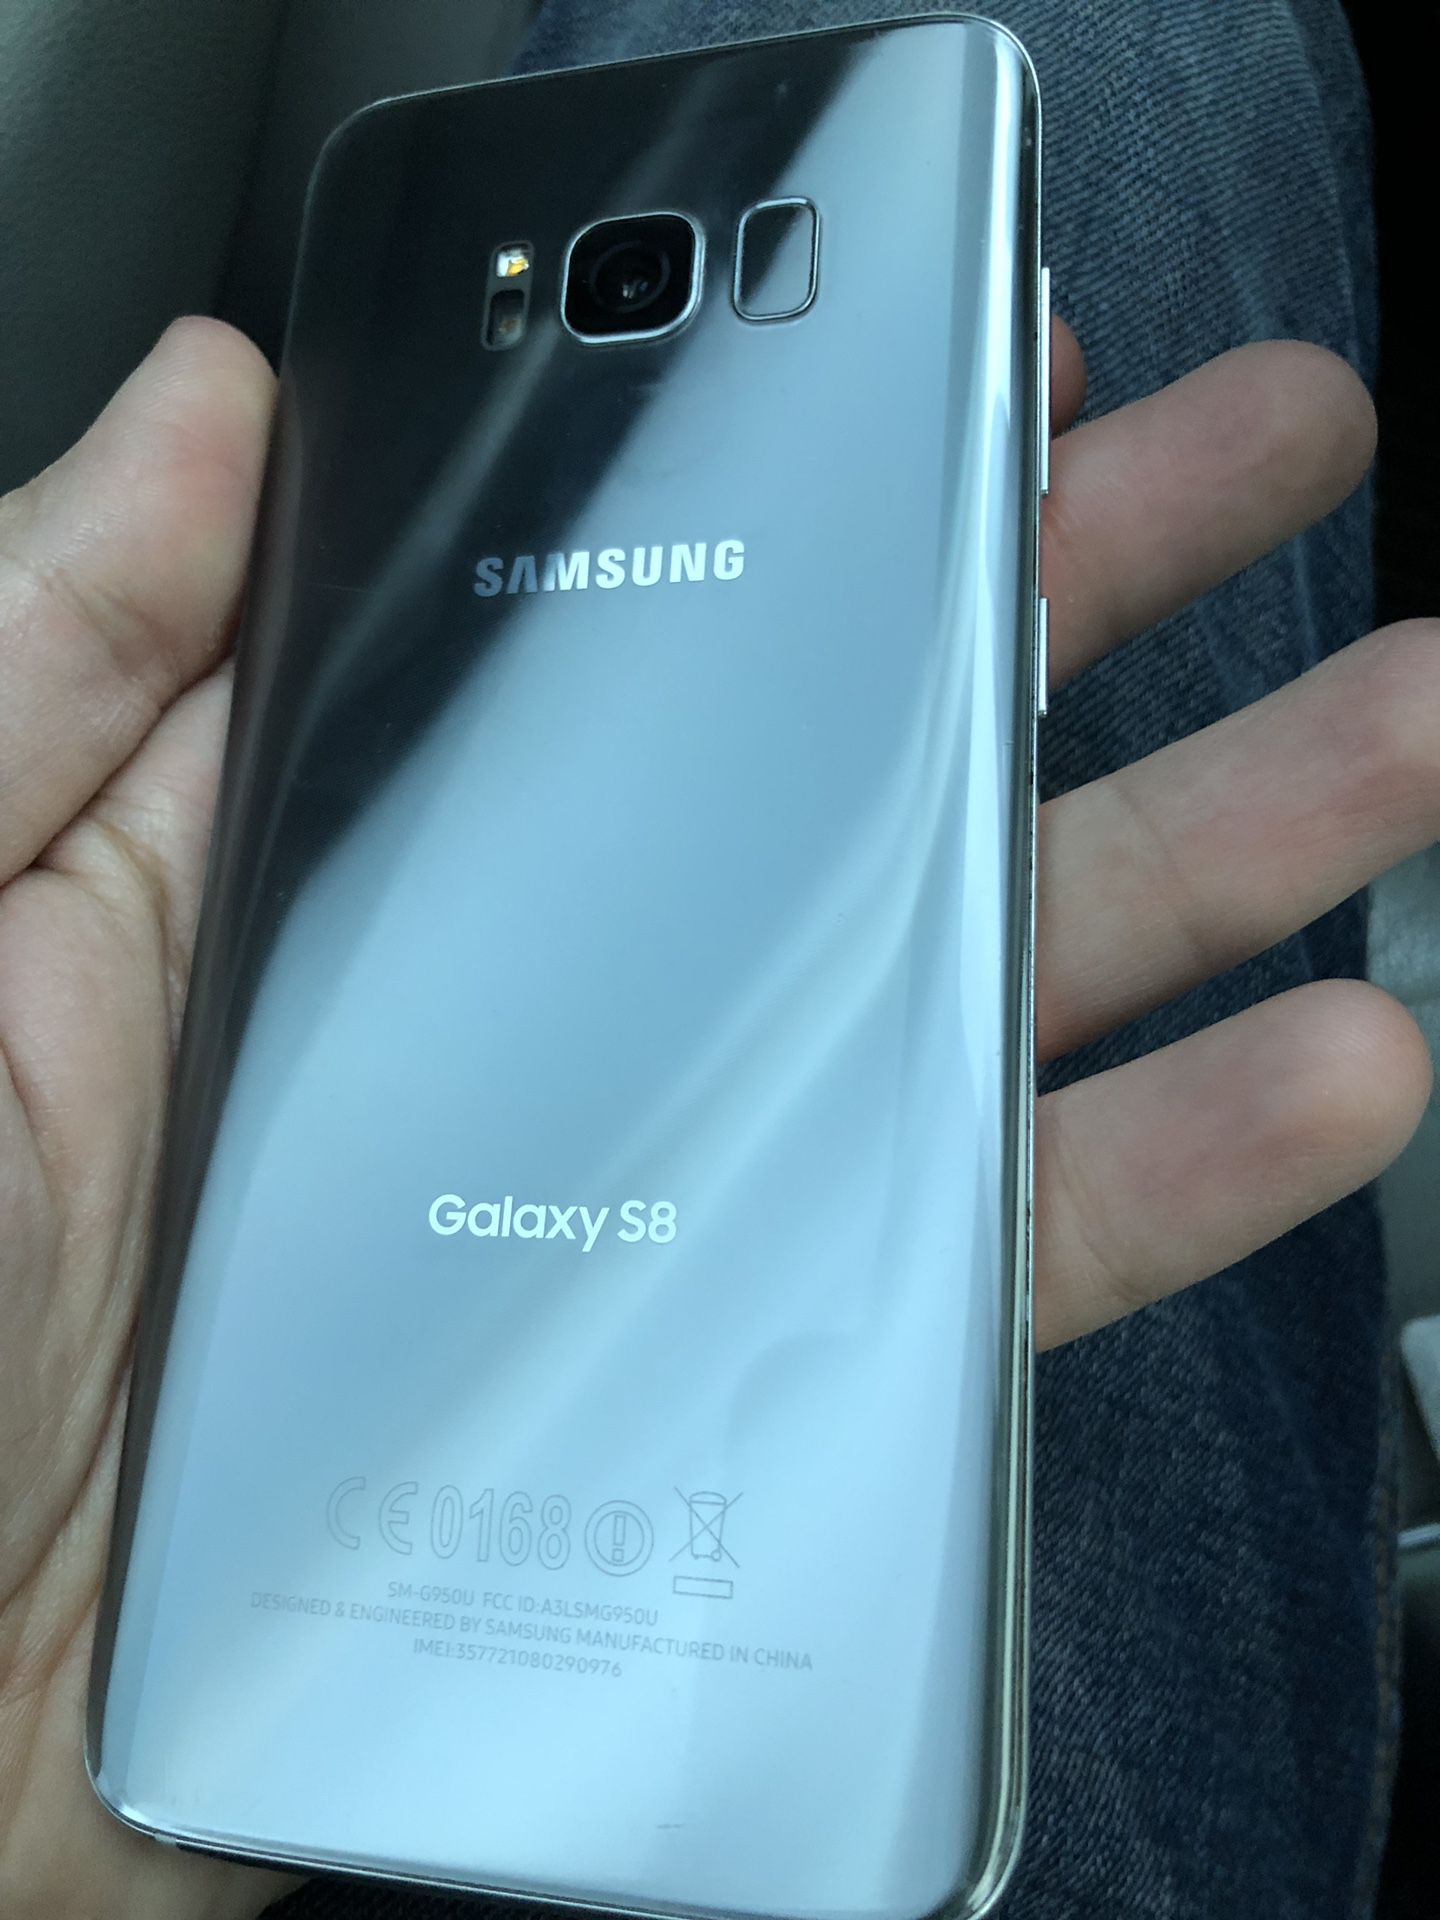 Samsung Galaxy S8 Unlocked works with Tmobile MetroPCS Cricket Straight Talk AT&T or Overseas Phone is in great condition, and works